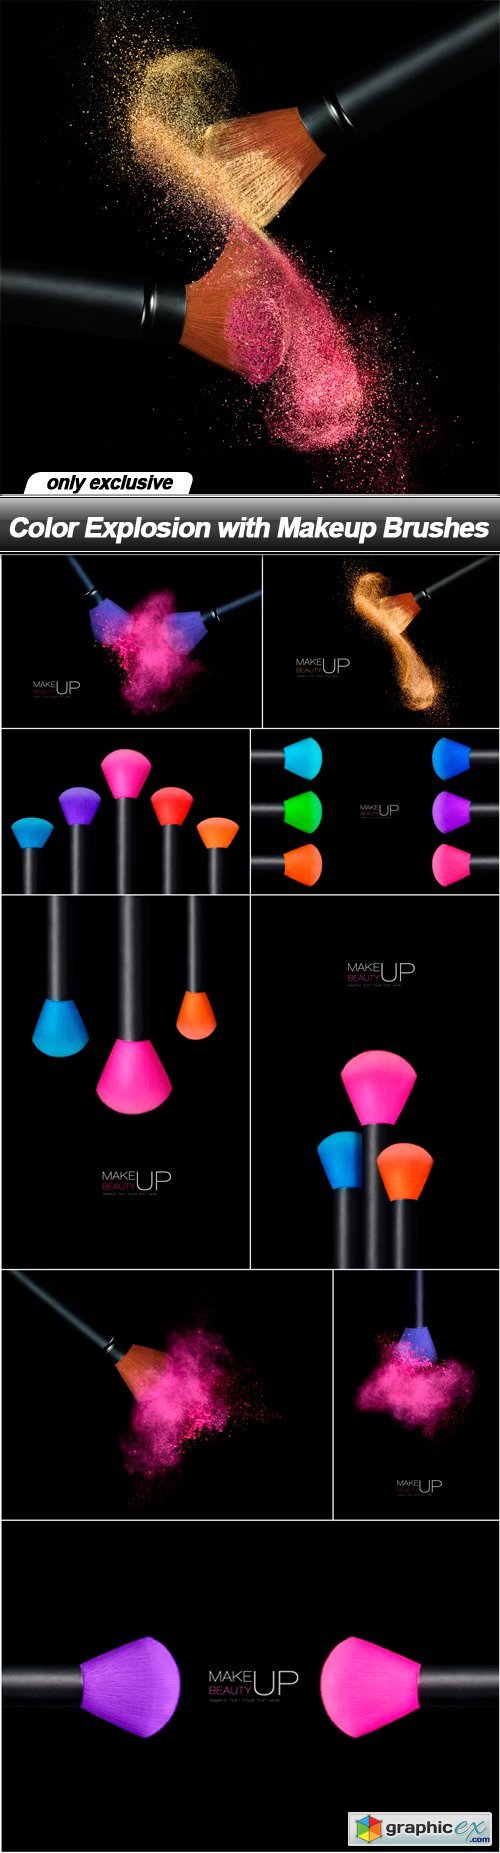 Color Explosion with Makeup Brushes - 10 UHQ JPEG